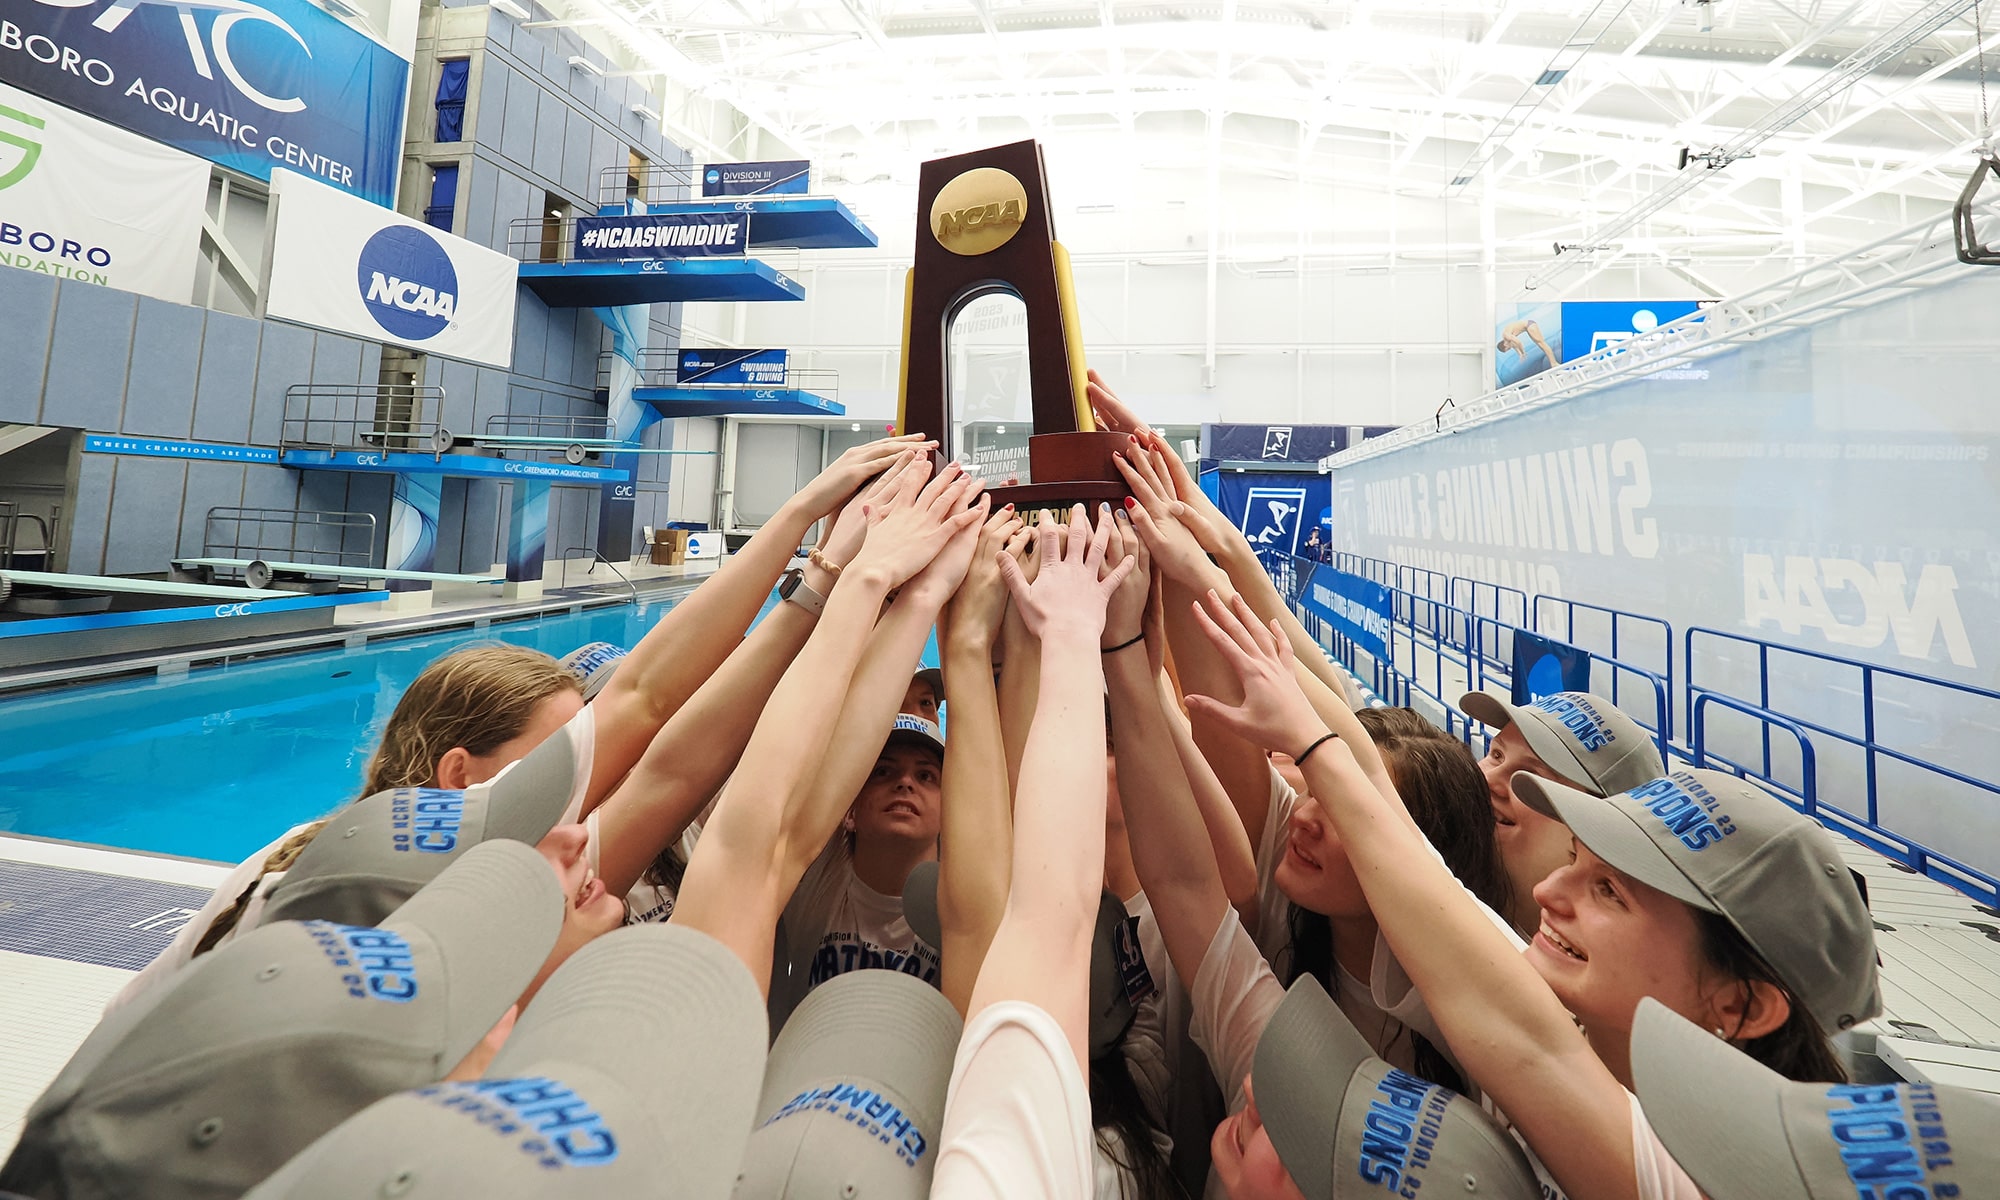 The Denison swim & dive team all hold up the championship trophy together